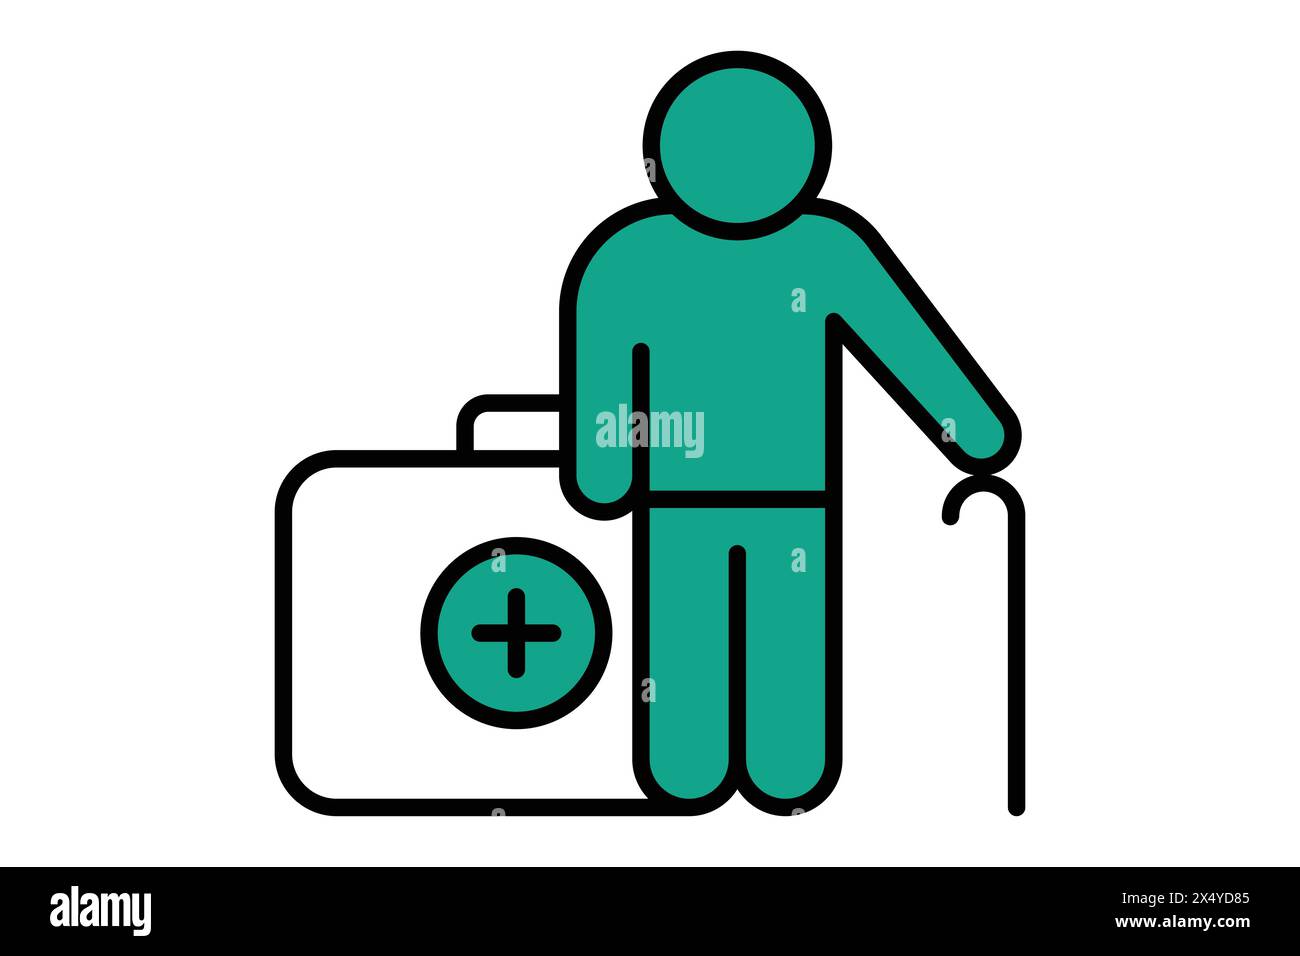 health icon. elderly using walking stick with health box. icon related to elderly. flat line icon style. old age element illustration Stock Vector